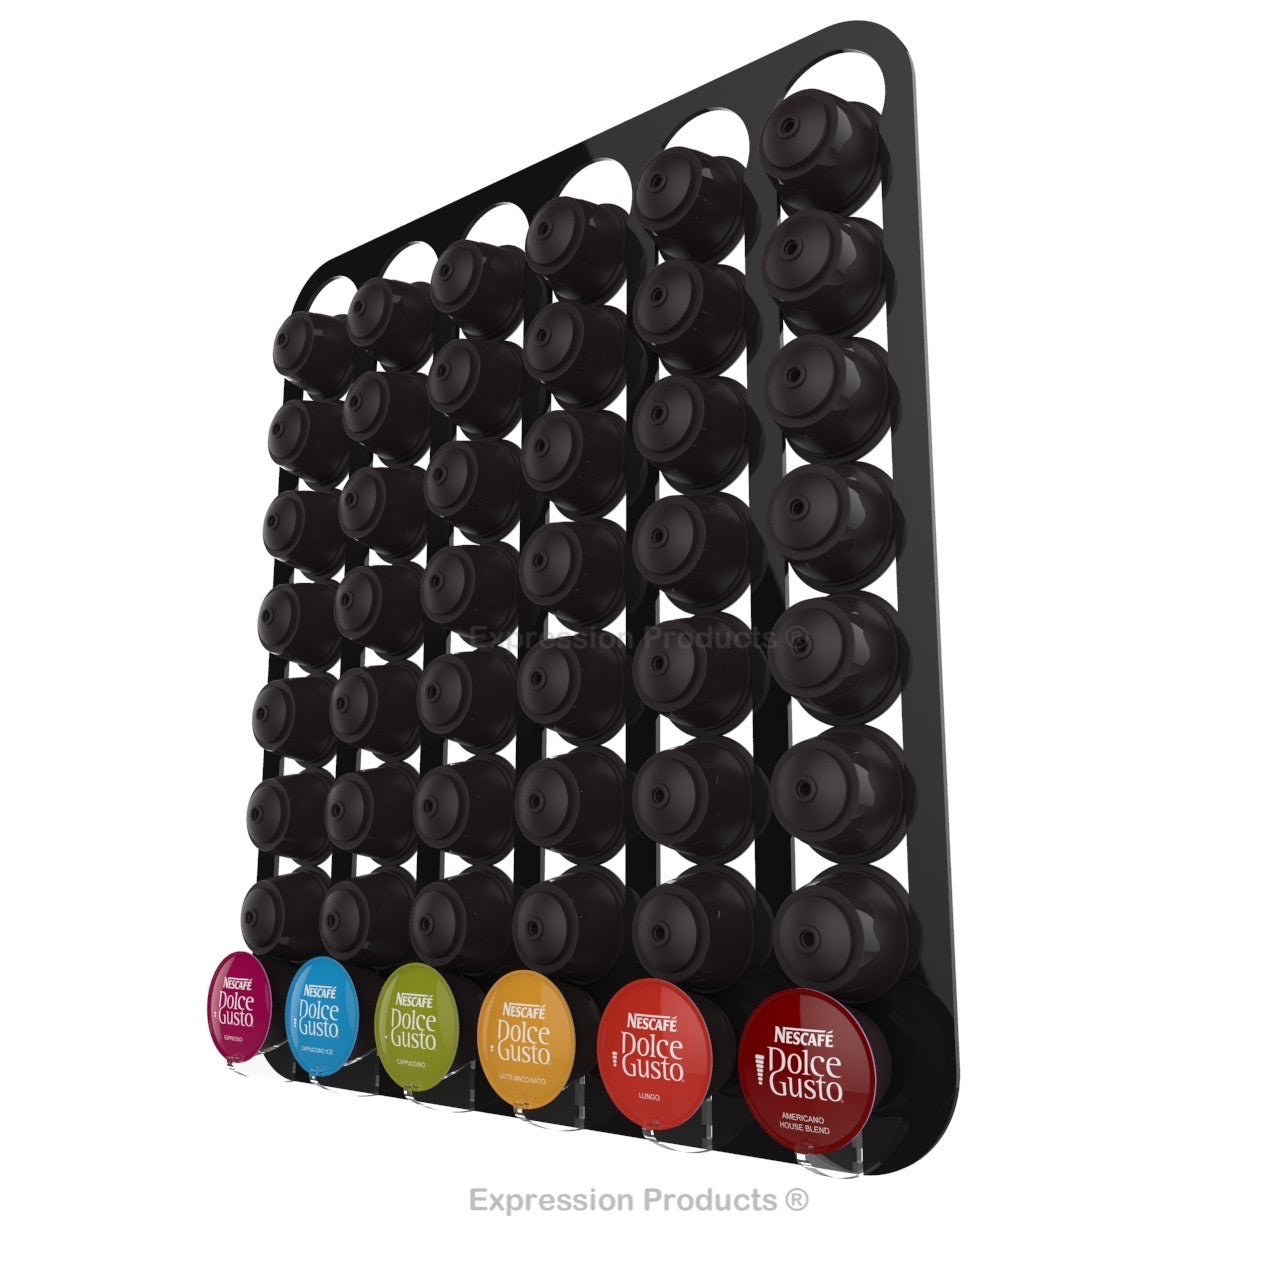 Dolce Gusto Coffee Pod Holder, Wall Mounted.  Shown in Black Holding 48 Pods